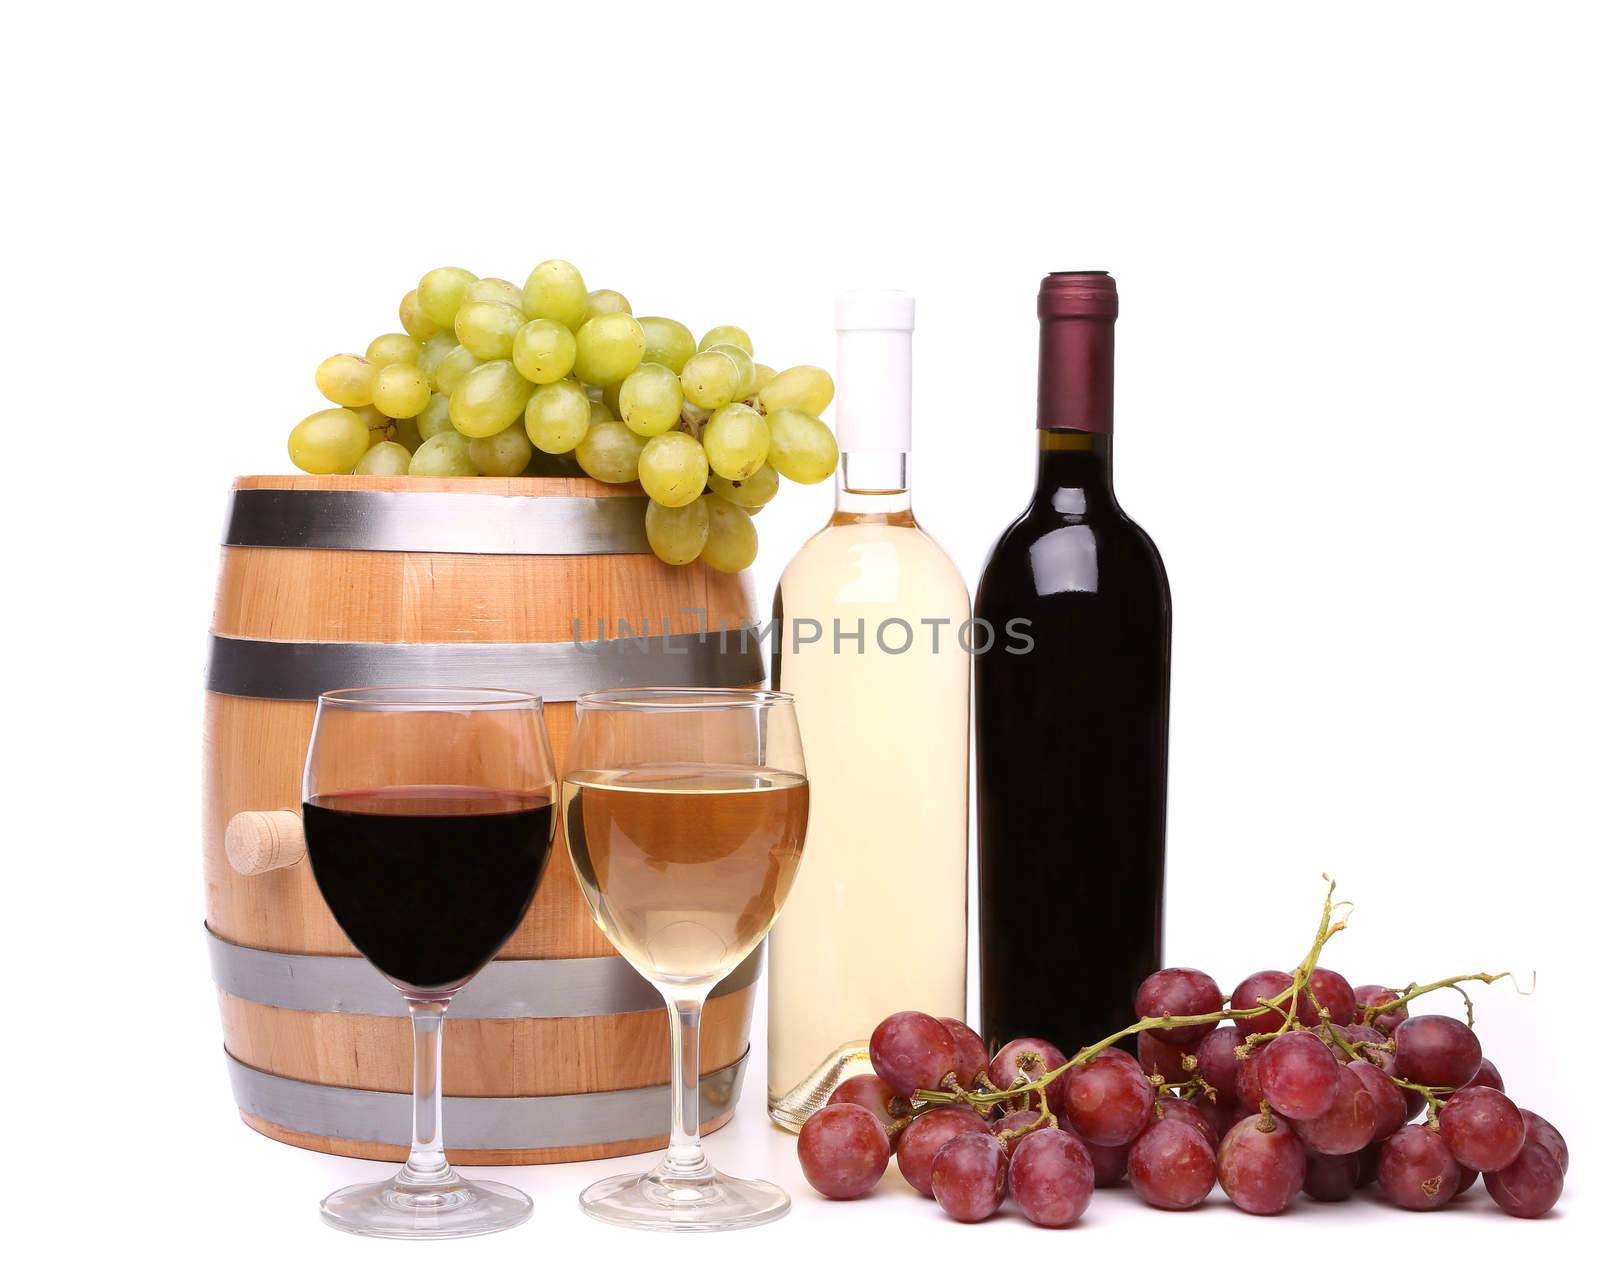 Wine composition is located on the white background.